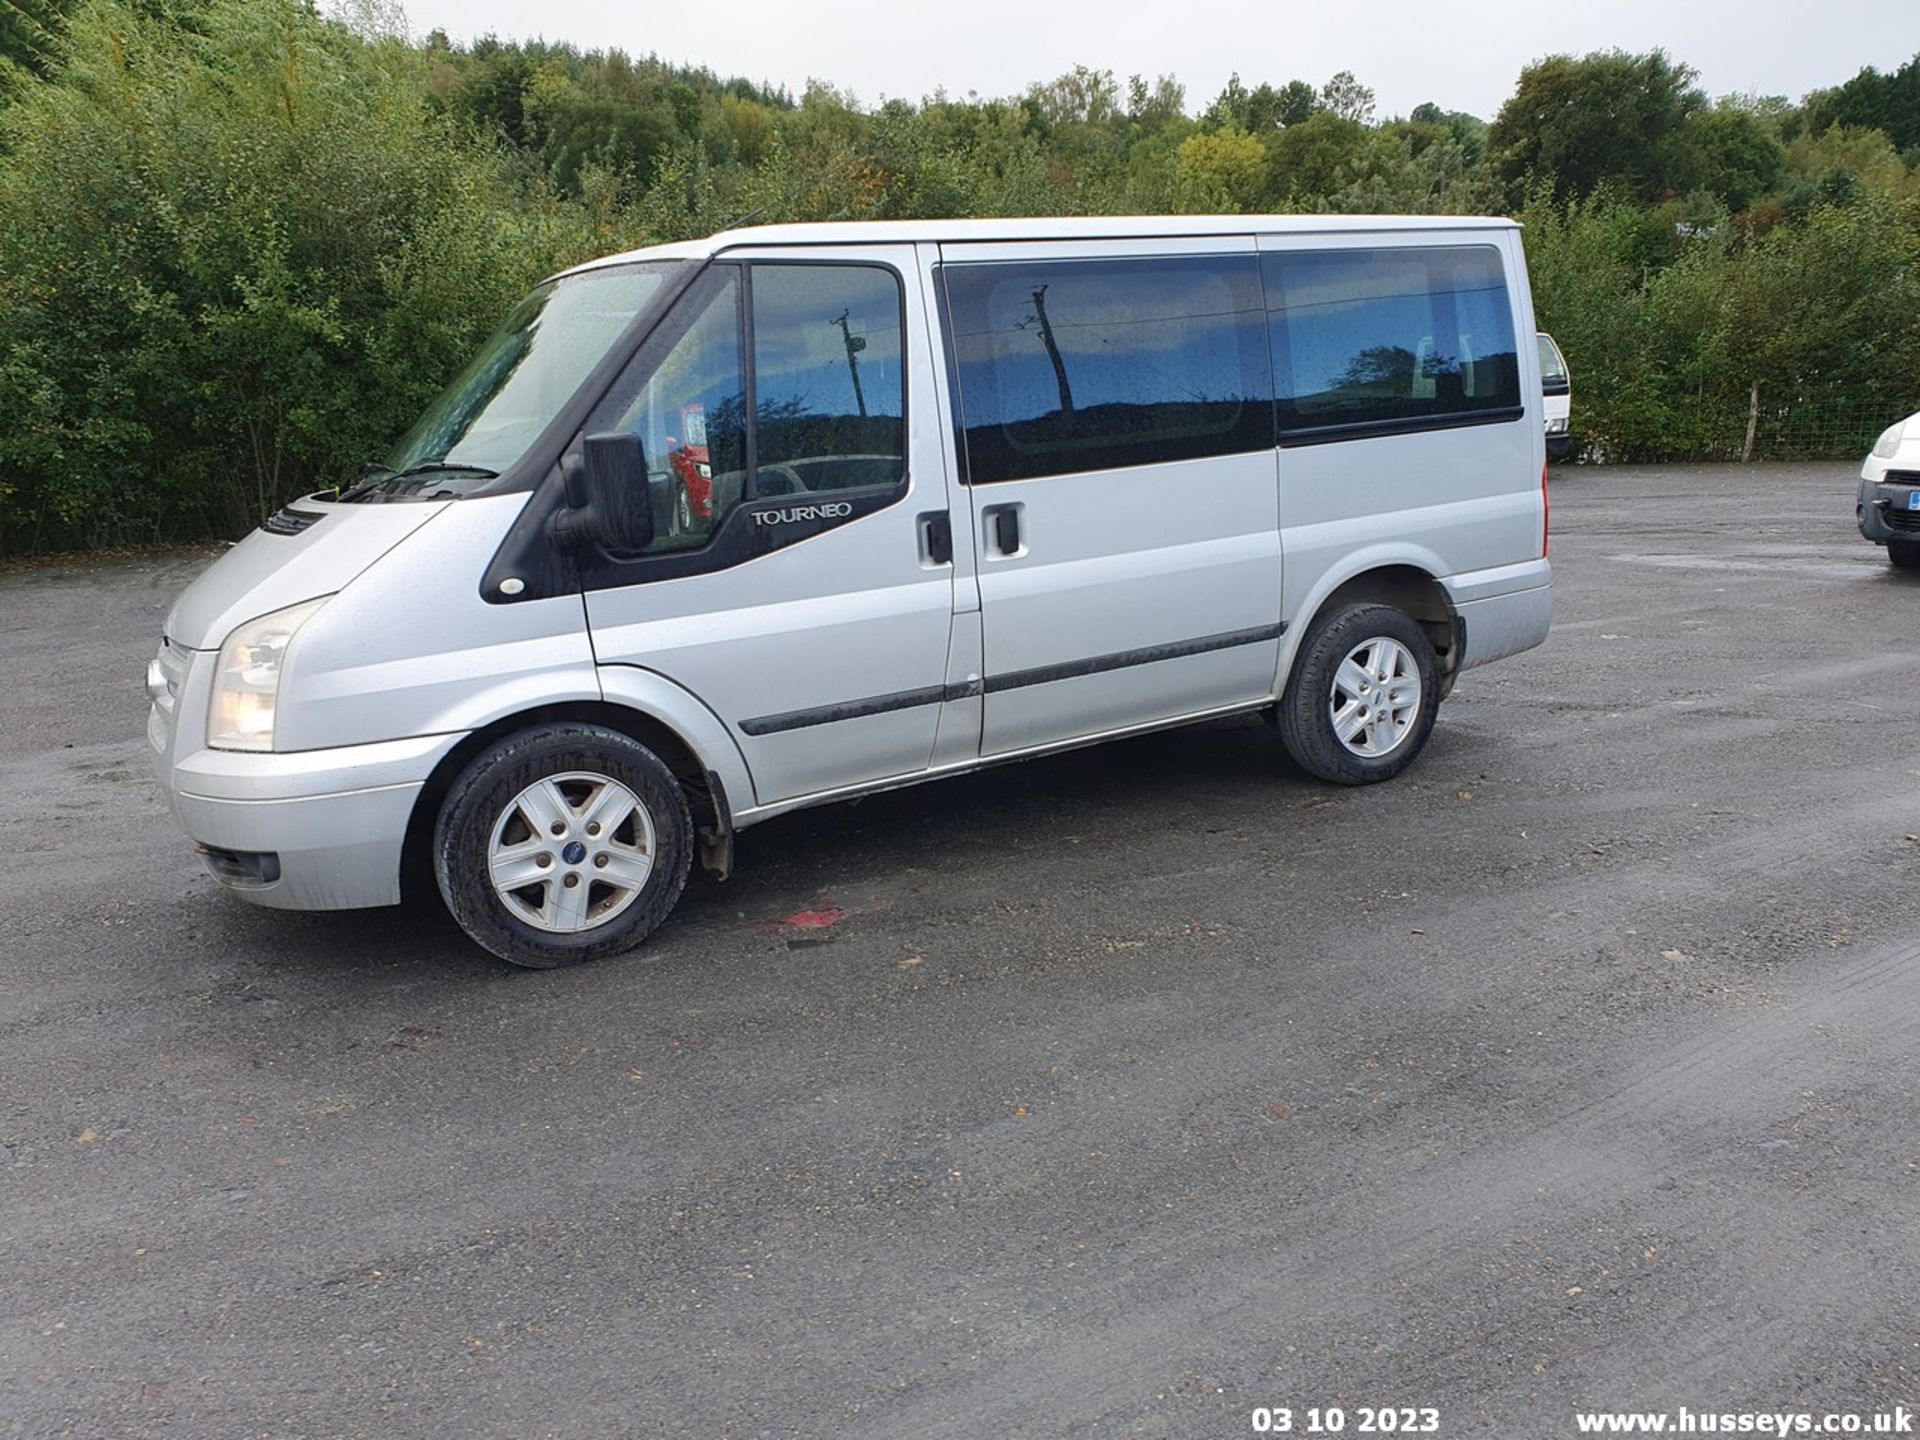 13/62 FORD TRANSIT 125 T280 FWD - 2198cc 5dr MPV (Silver, 146k) - Image 6 of 65